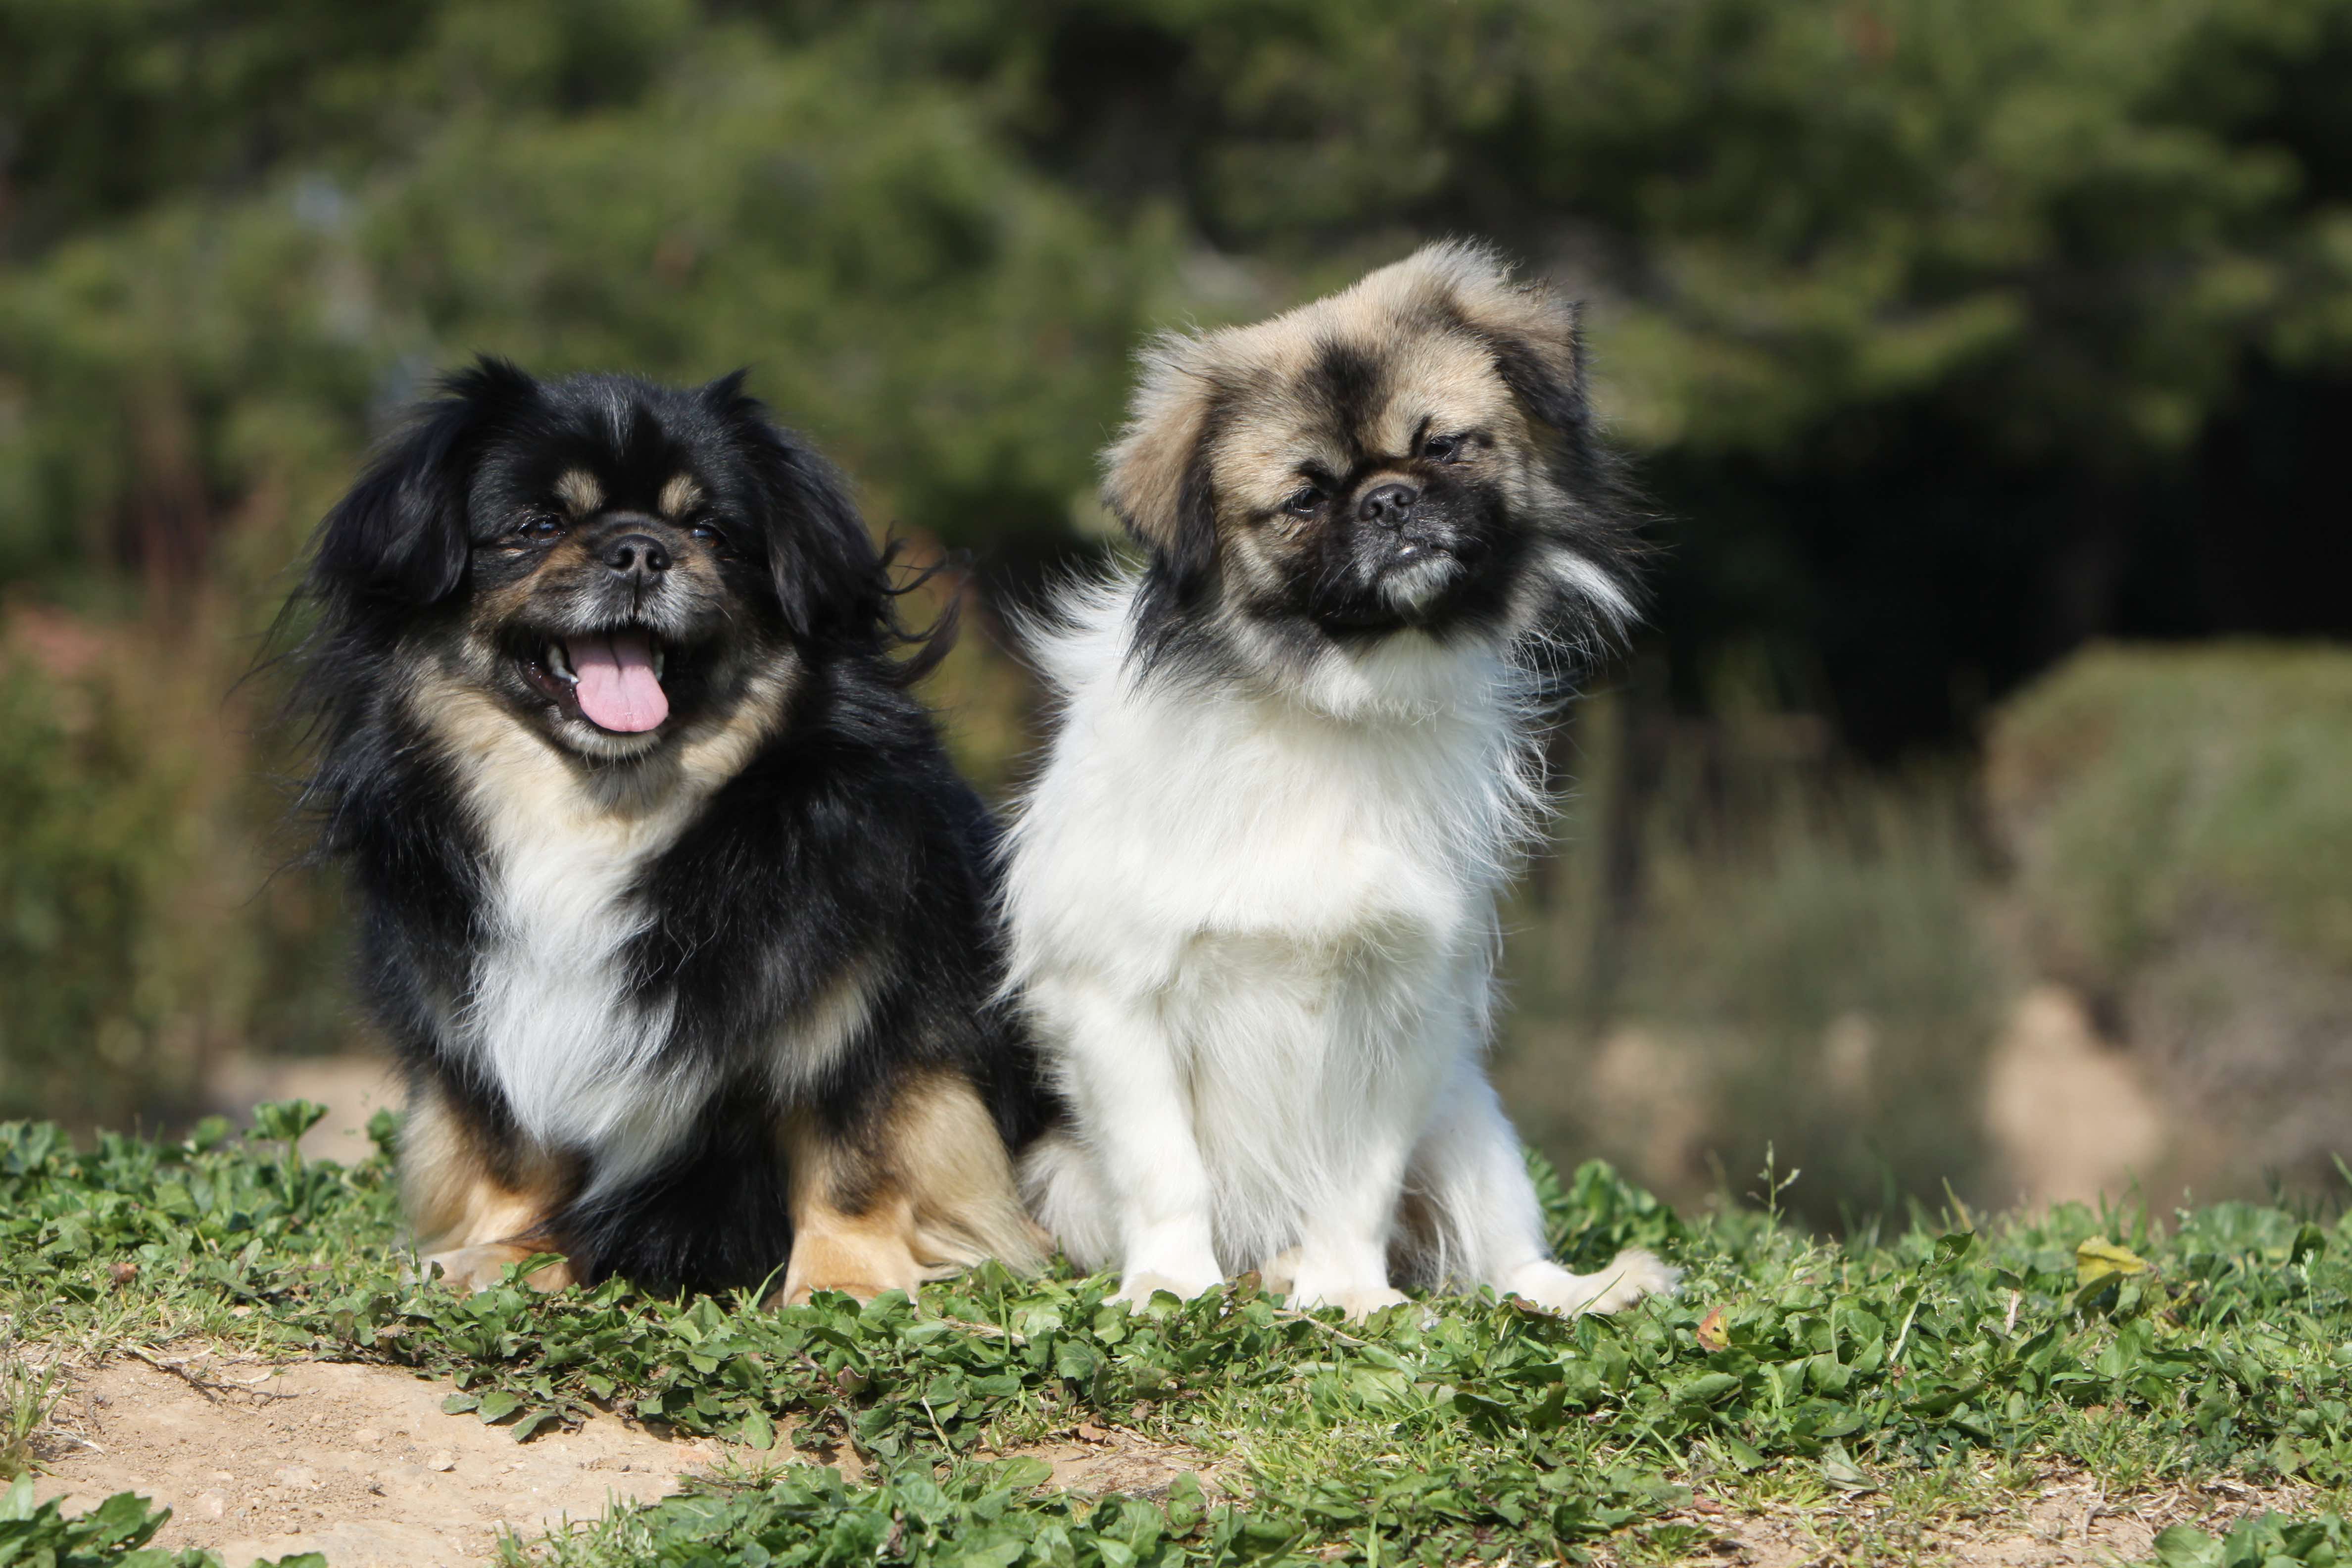 two tibetan spaniel dogs sitting together